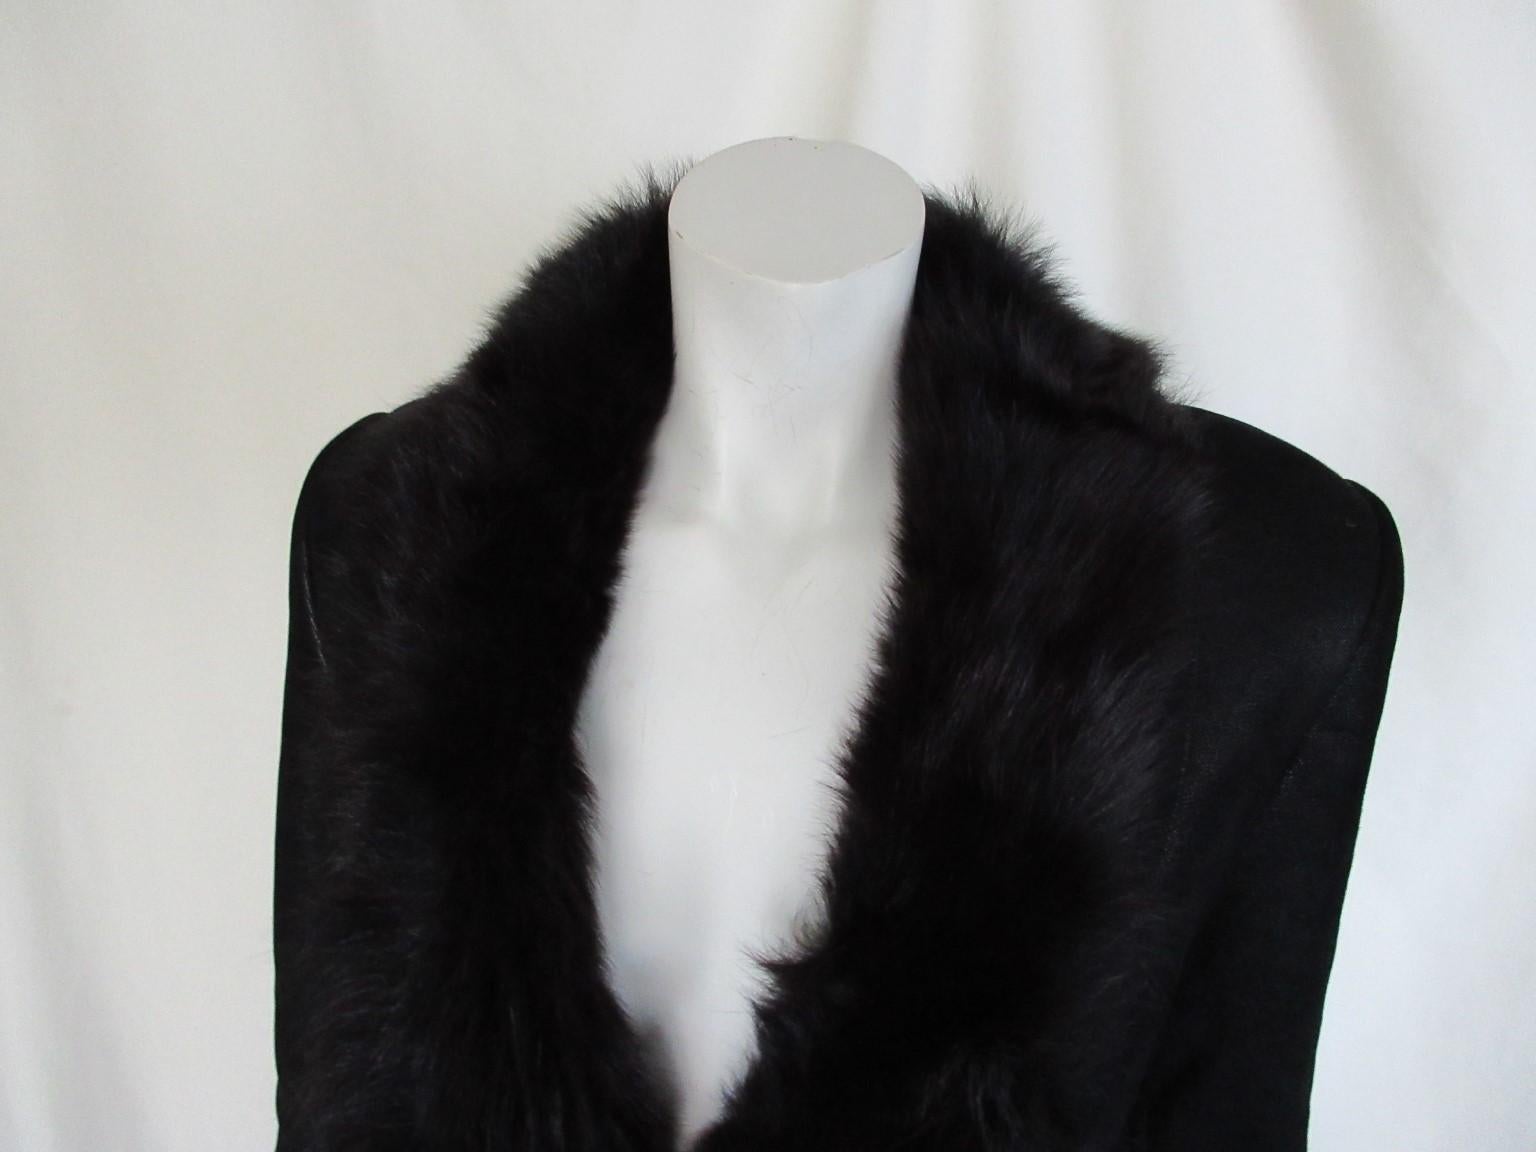 This Gucci jacket is made of soft black Tuscany lamb fur

We offer more Gucci, Hermes and exclusive Fur items, view our frontstore.

Details:
Made of black soft quality shearling, 
With 2 pockets and 2 closinghooks
The size is mentioned Italy 38 /